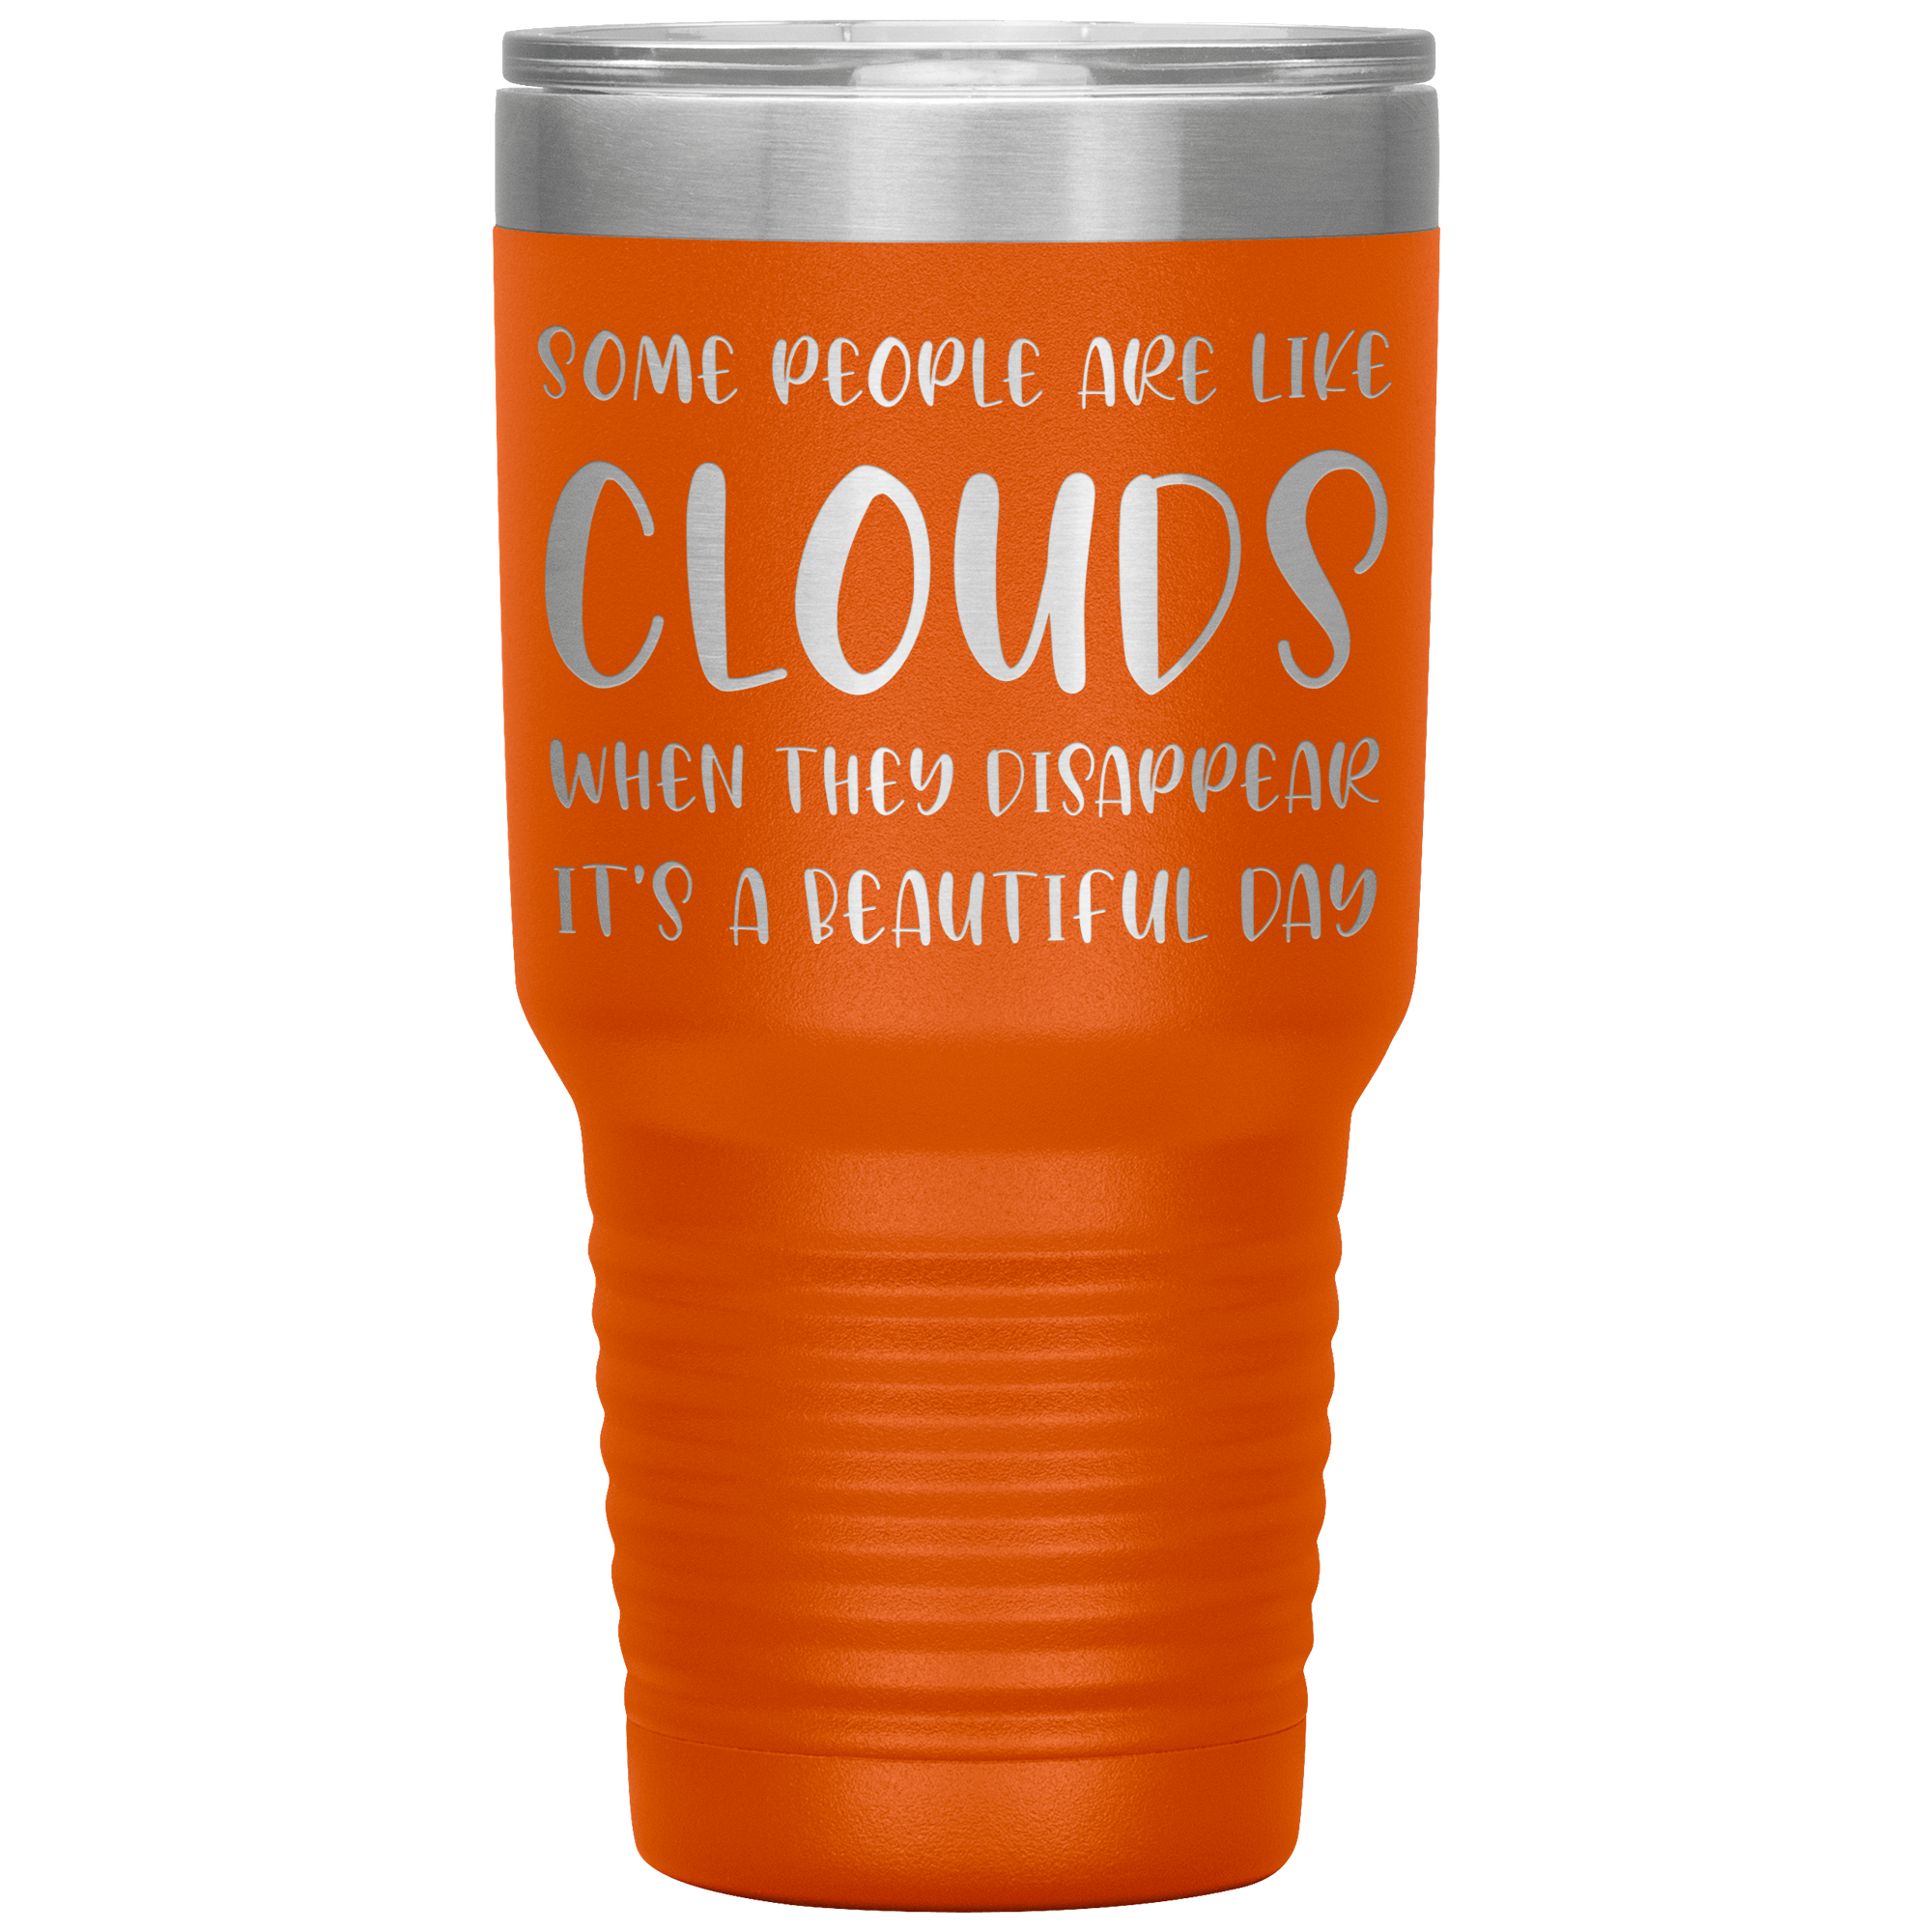 " SOME PEOPLE ARE LIKE CLOUDS " TUMBLER